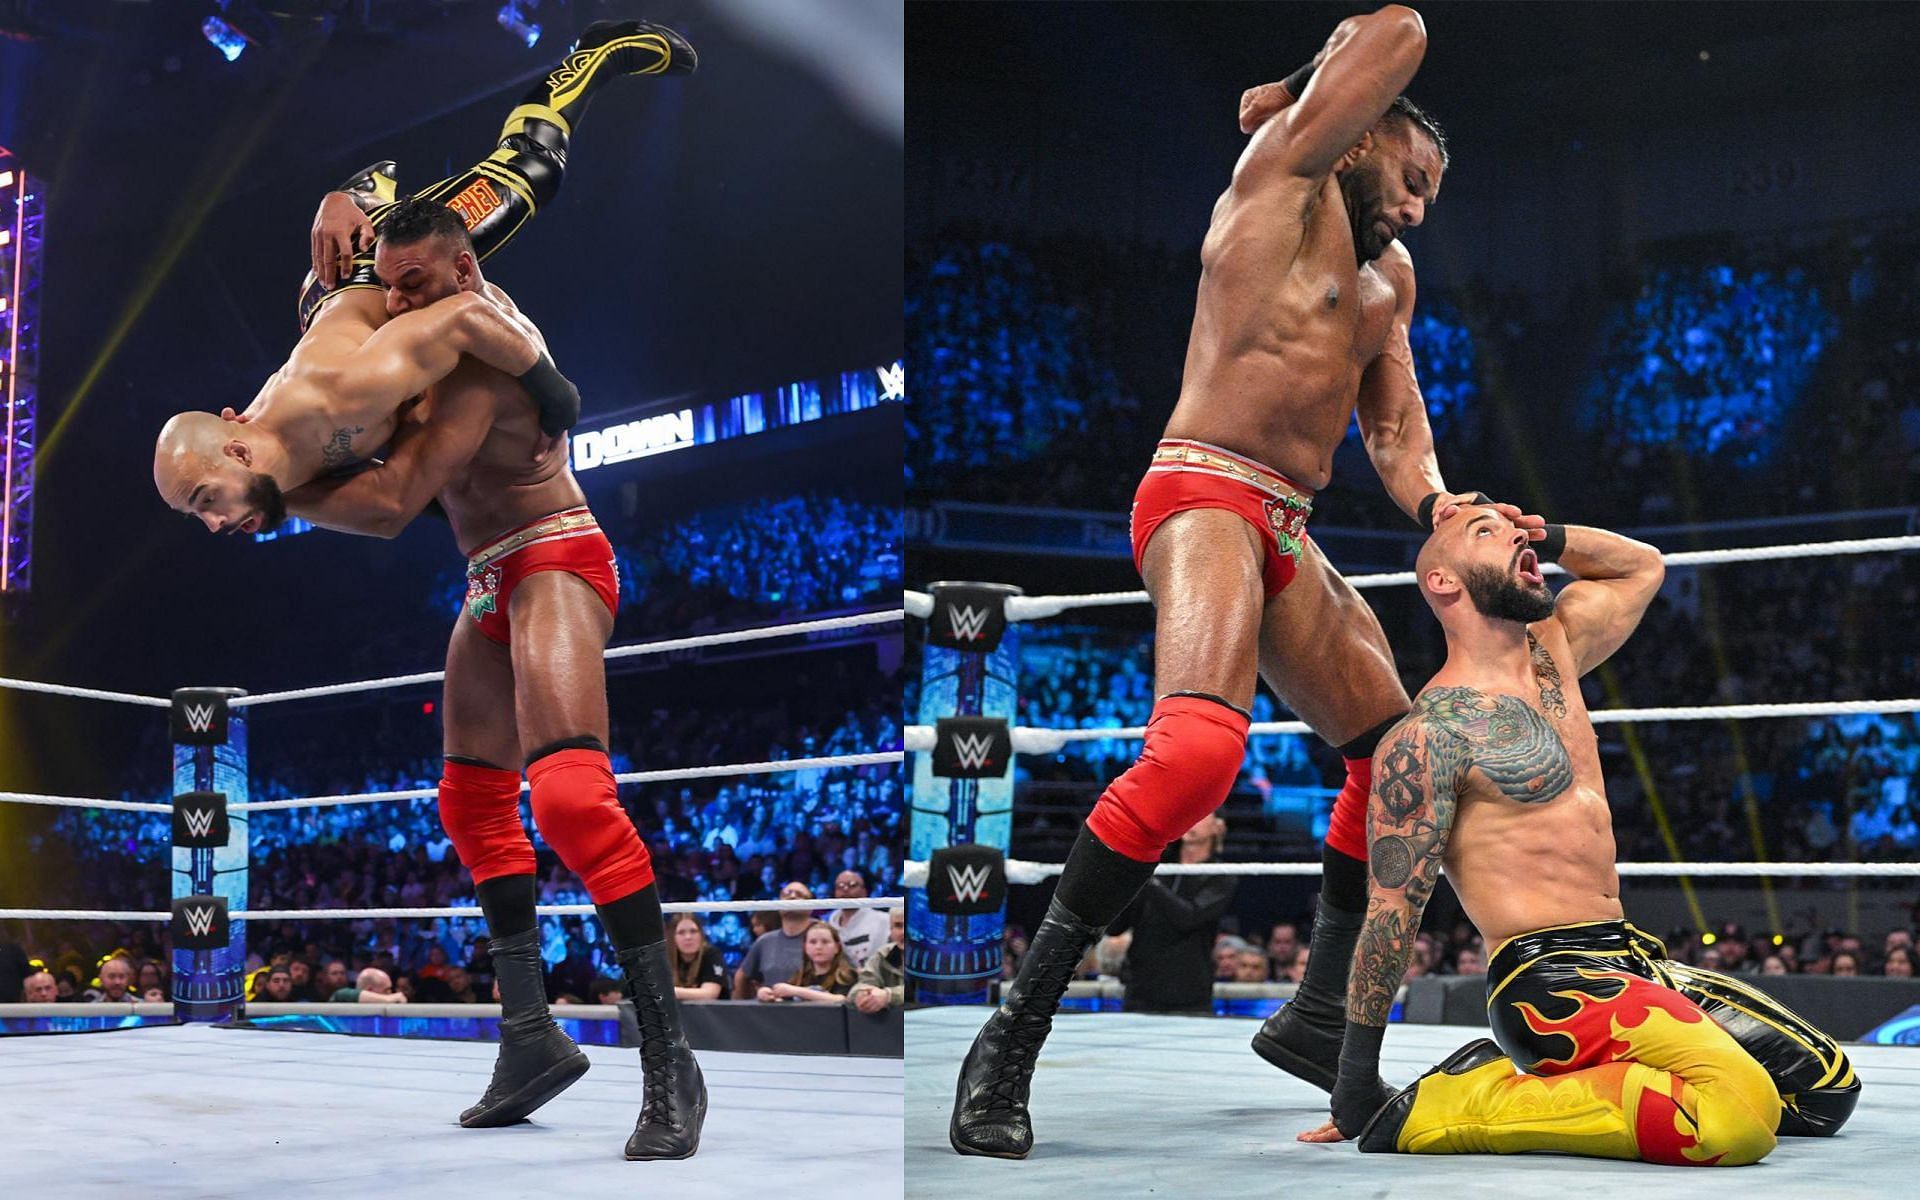 Jinder Mahal against Ricochet for the Intercontinental Championship on SmackDown